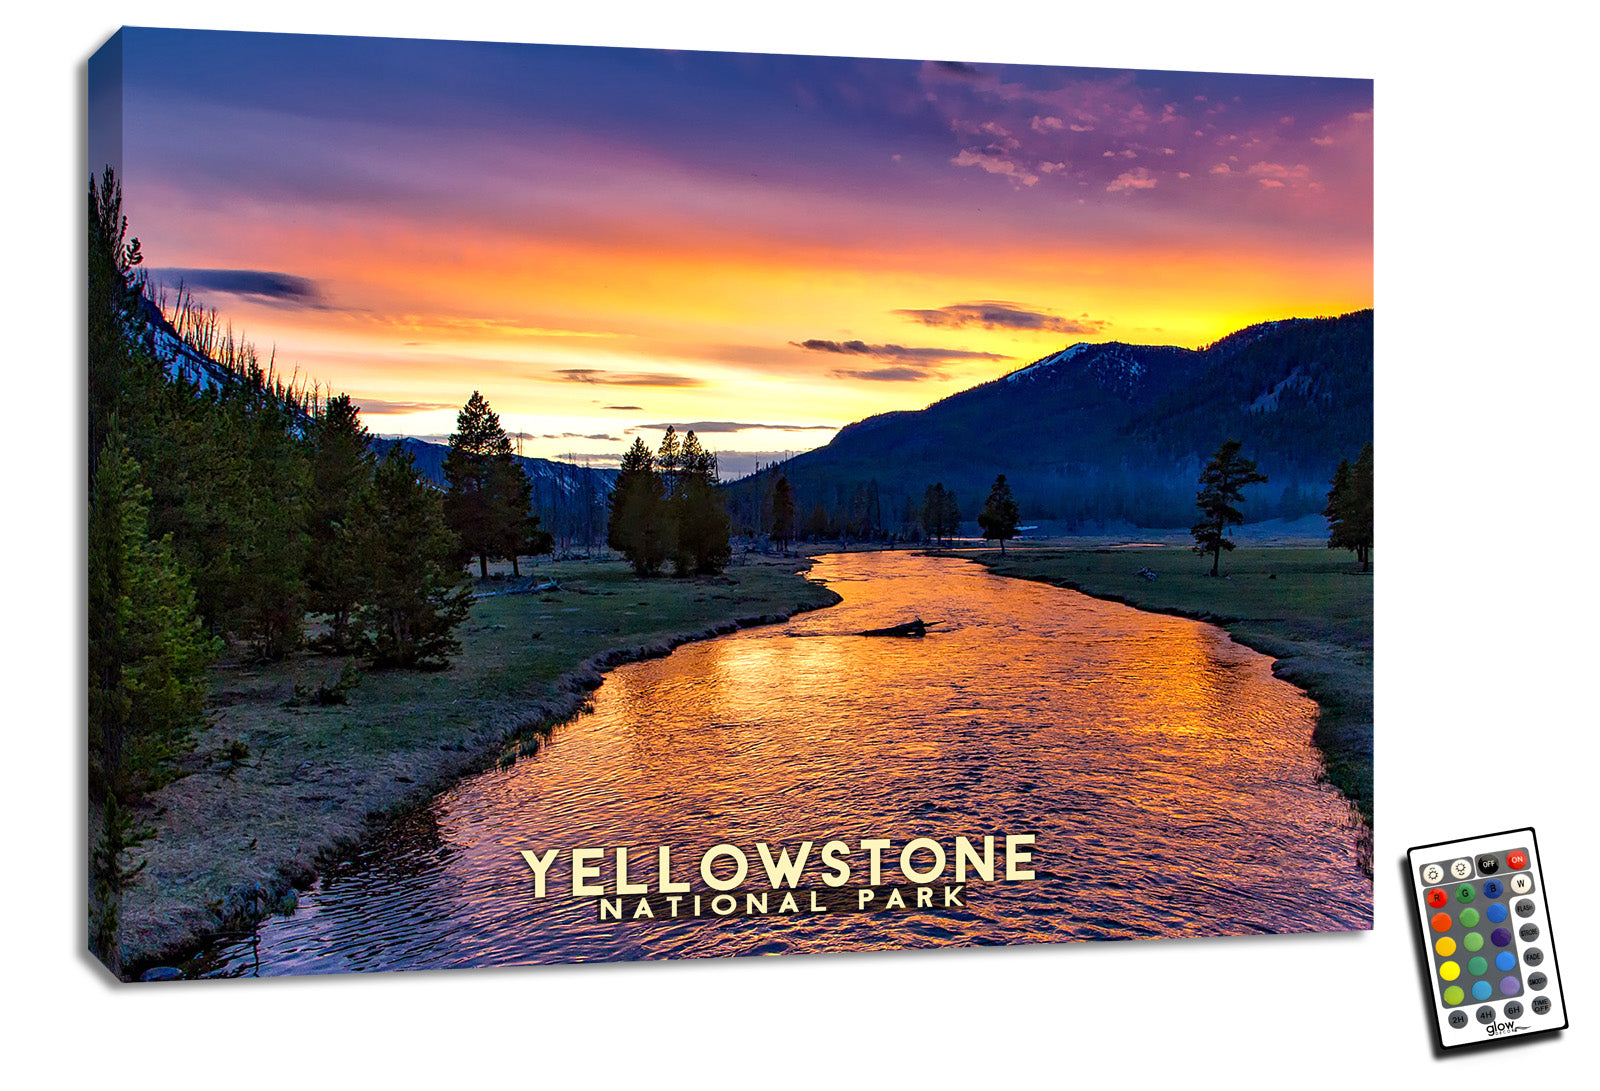 This 18x24 masterpiece captures the essence of the park with its picturesque depiction of the Yellowstone River flowing gently through the landscape as the sun sets over the majestic mountains.